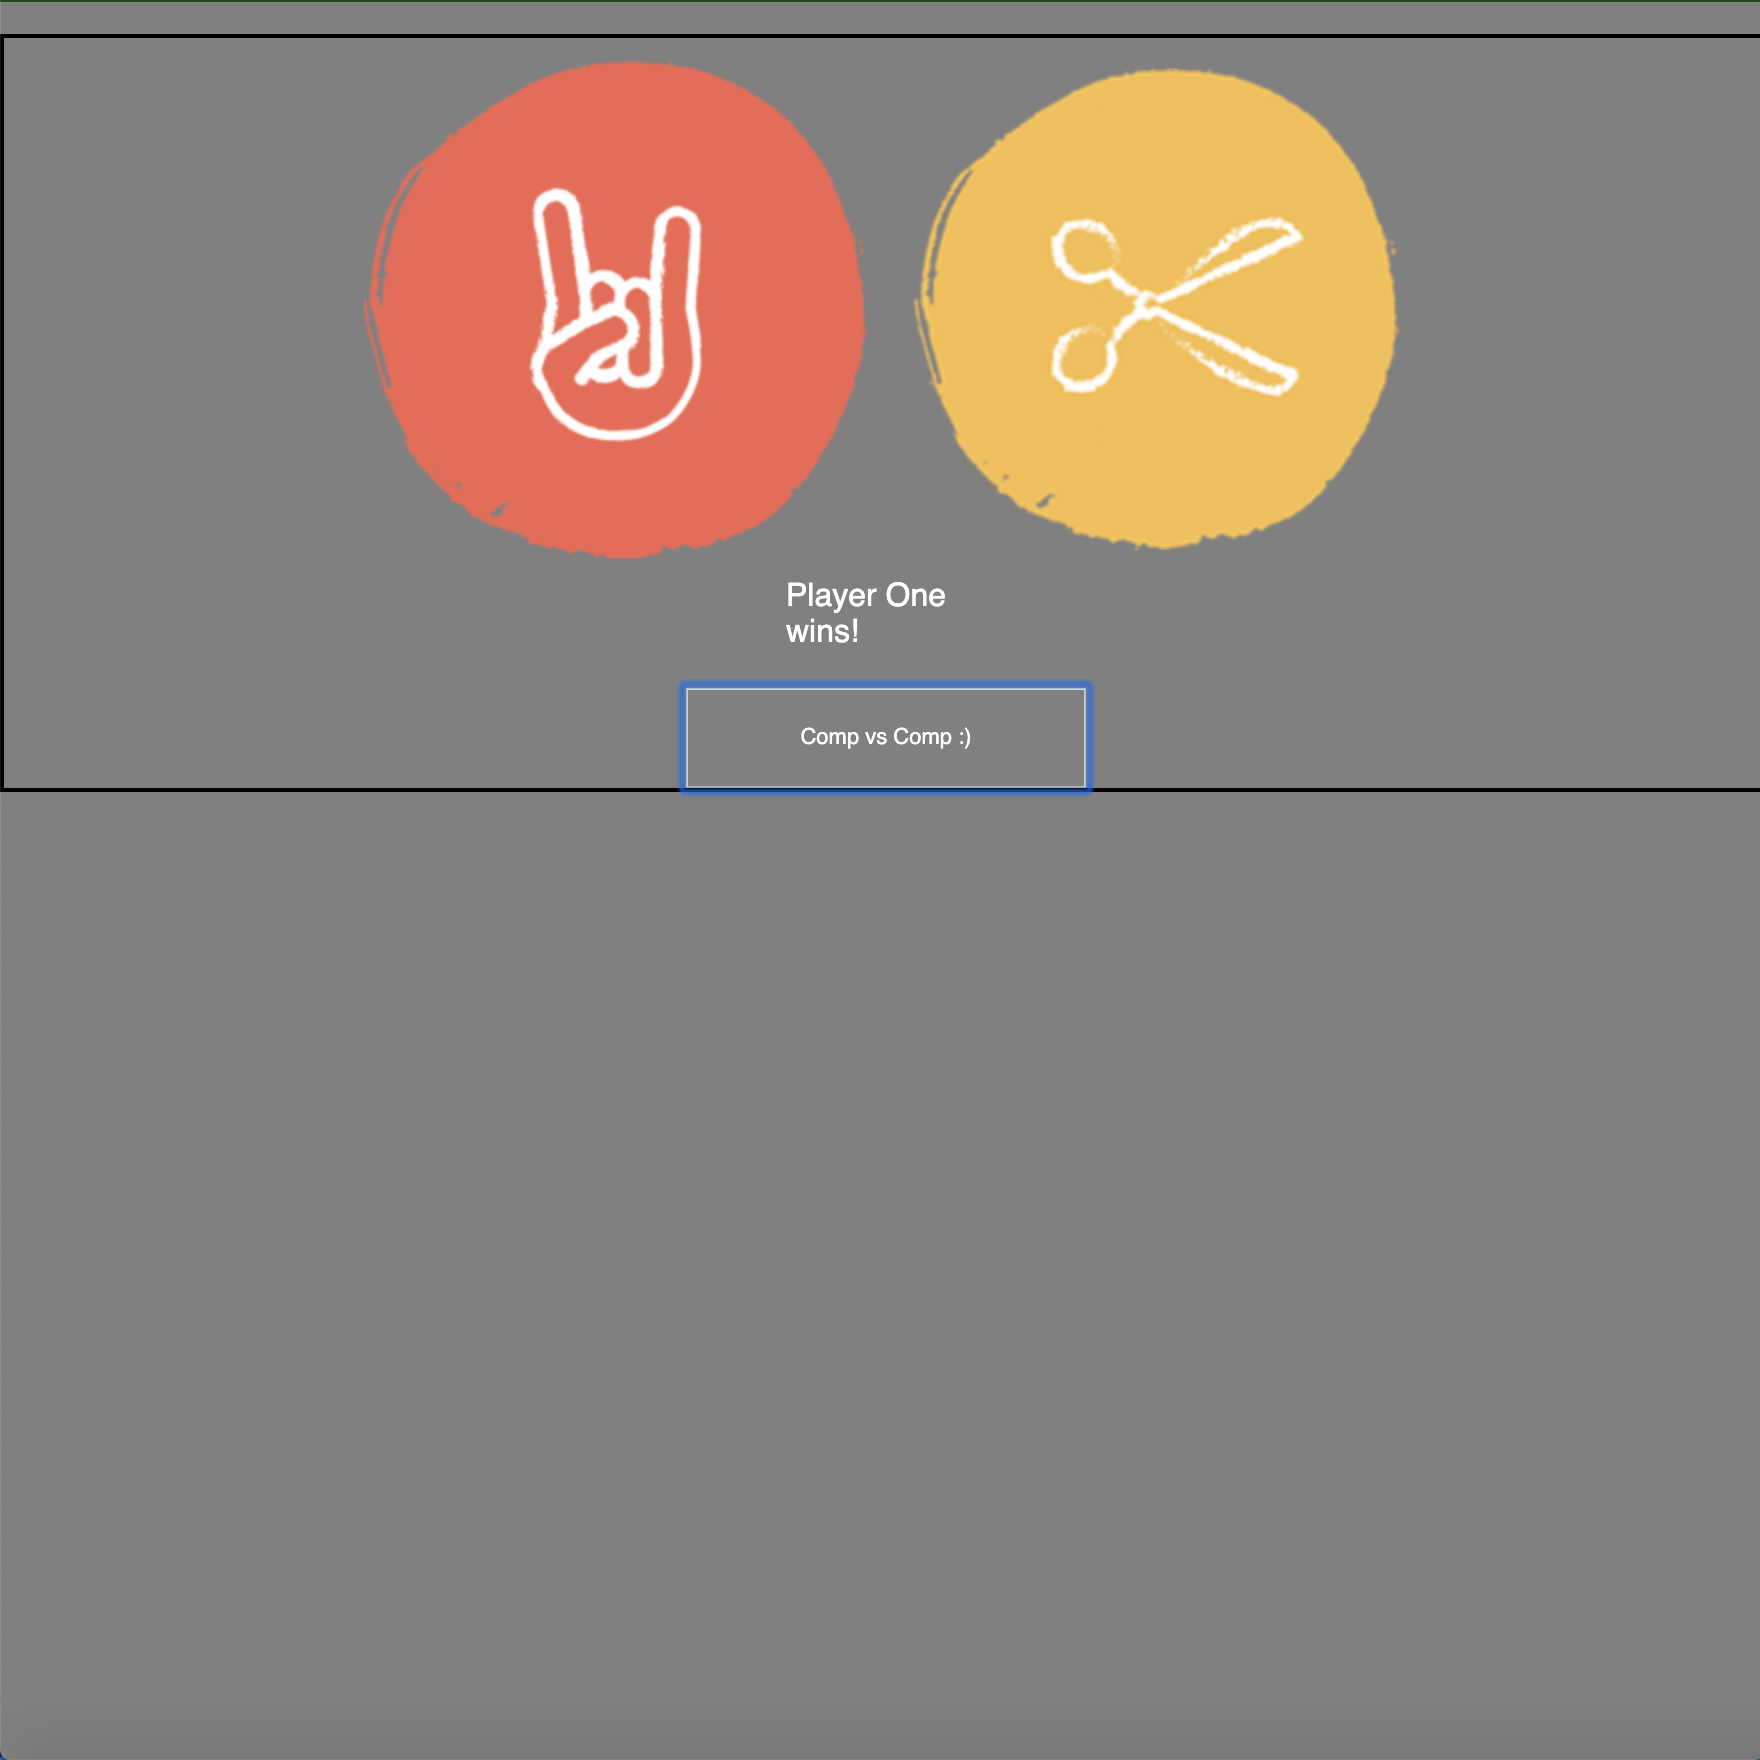 Image of the Rock-Paper-Scissors React.js project